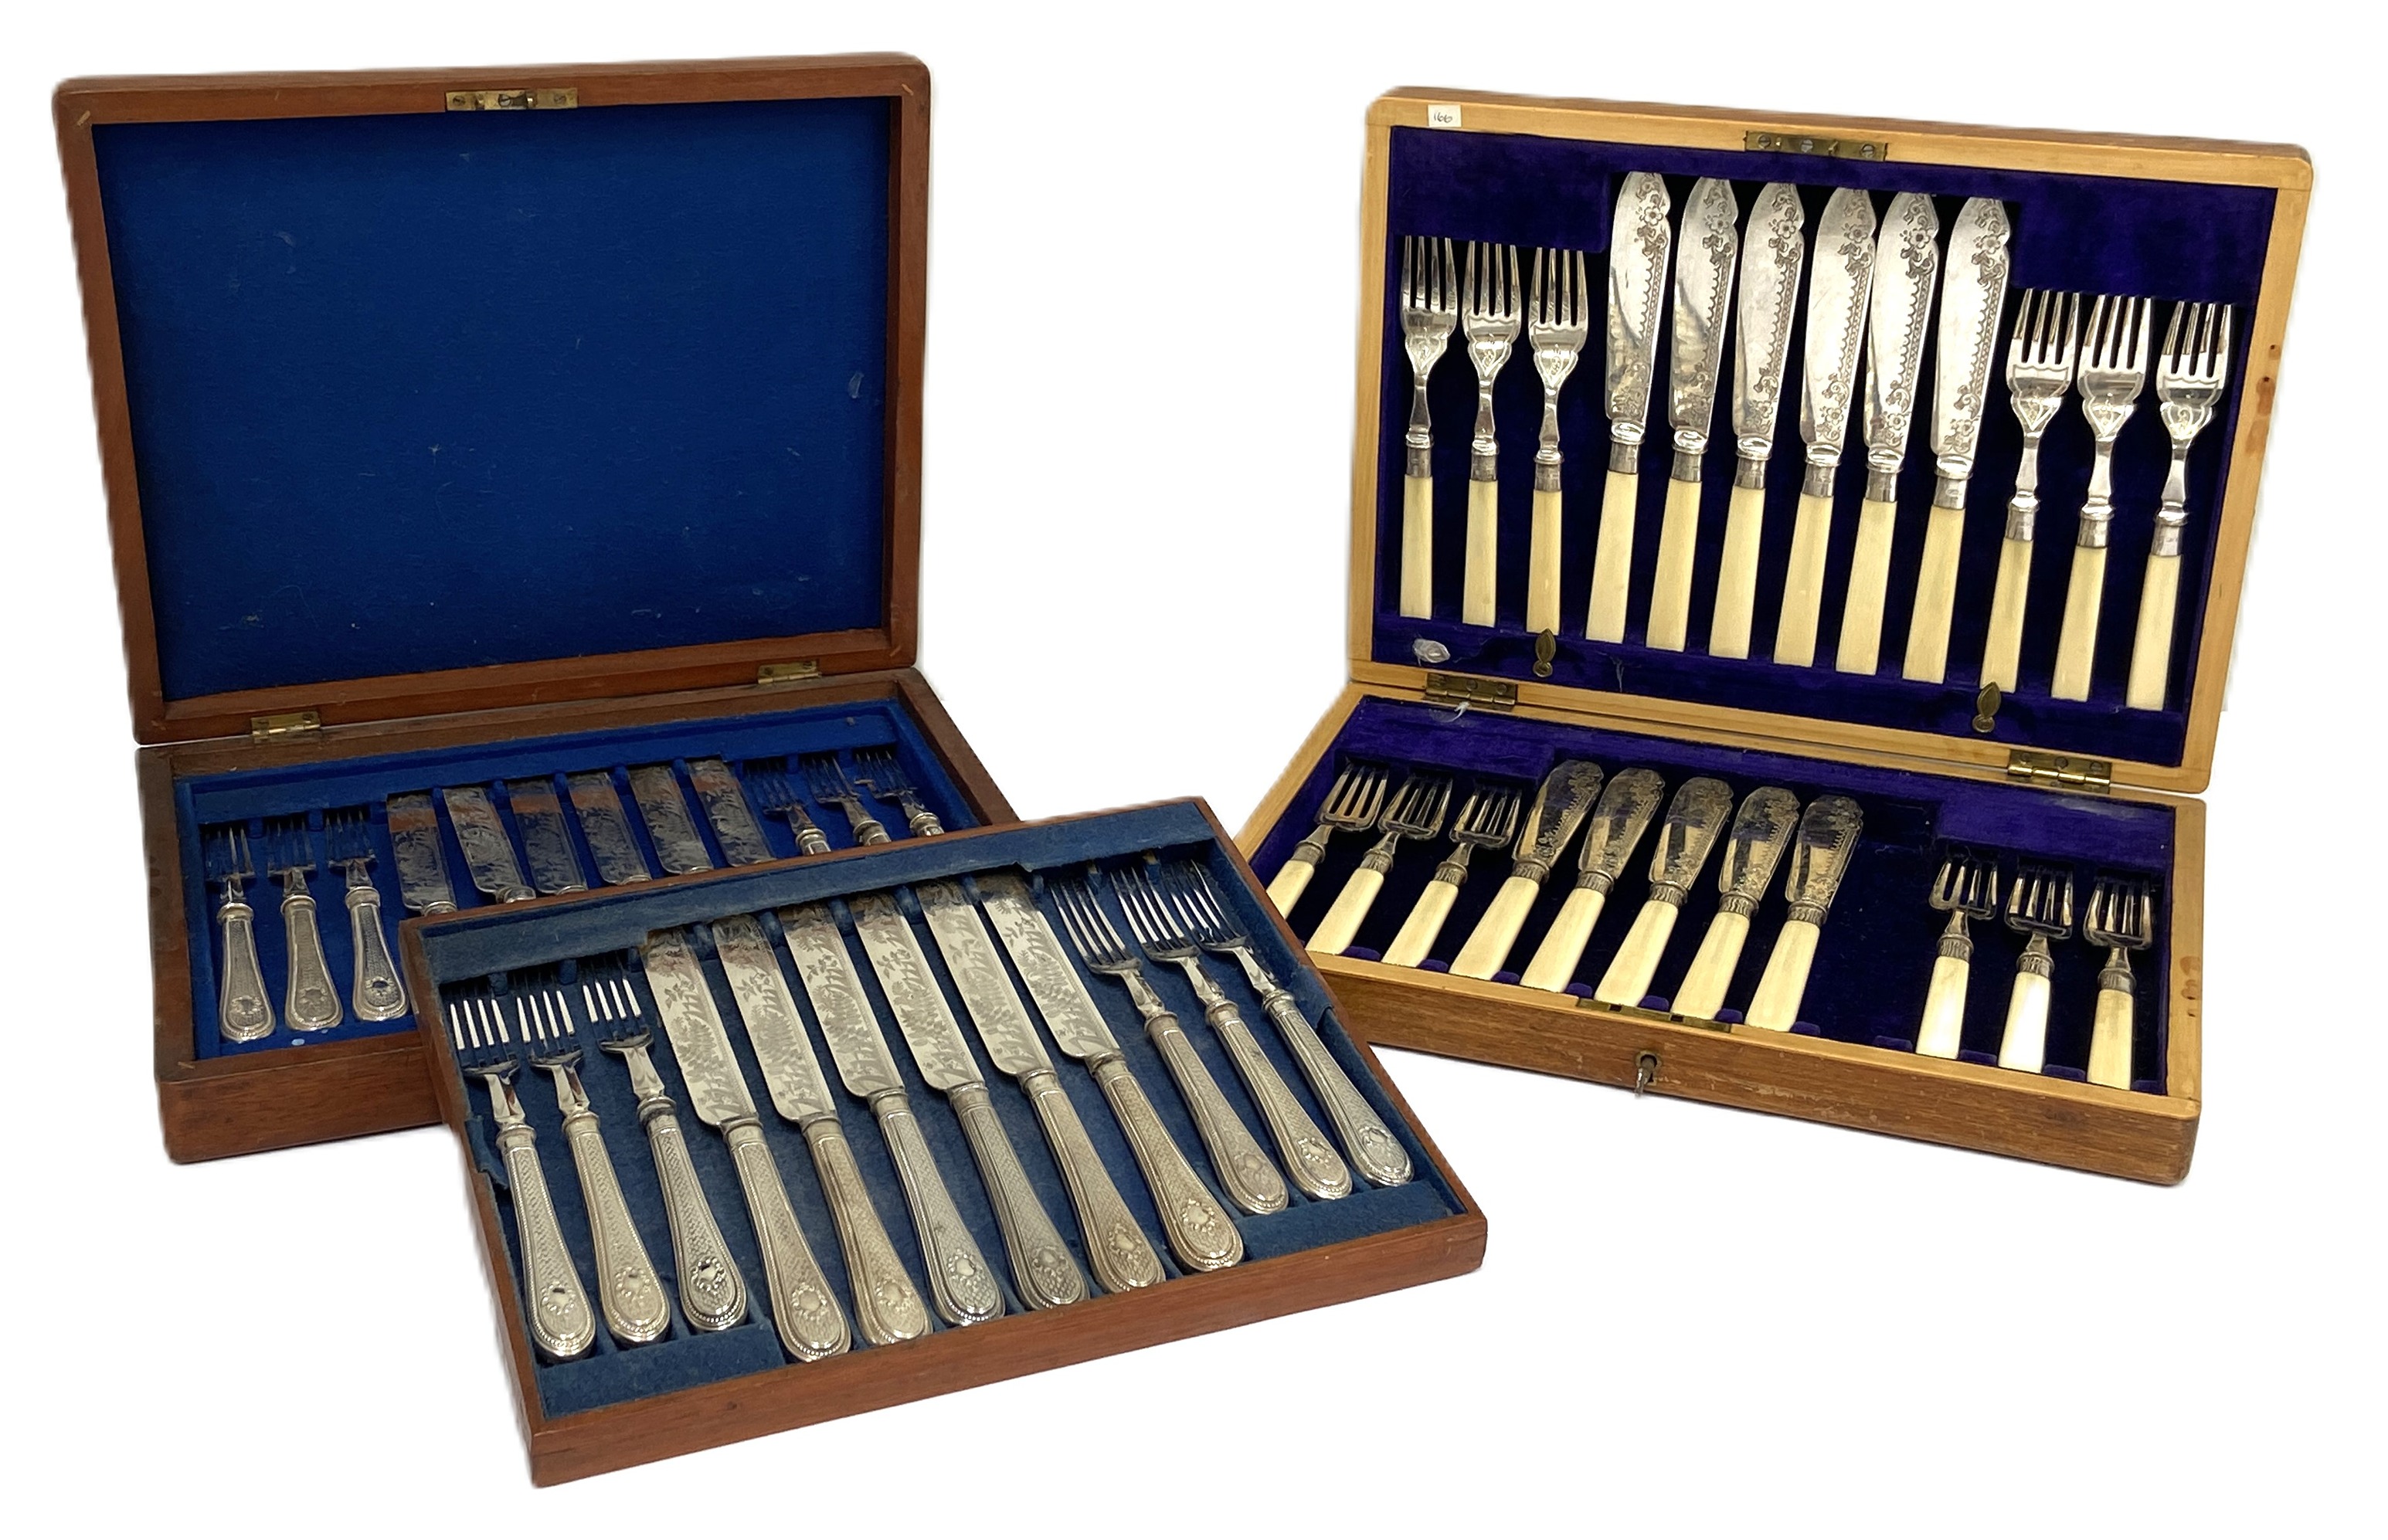 Two cased sets of flatware, including a set of twelve pairs of fruit eaters, and a set of fish